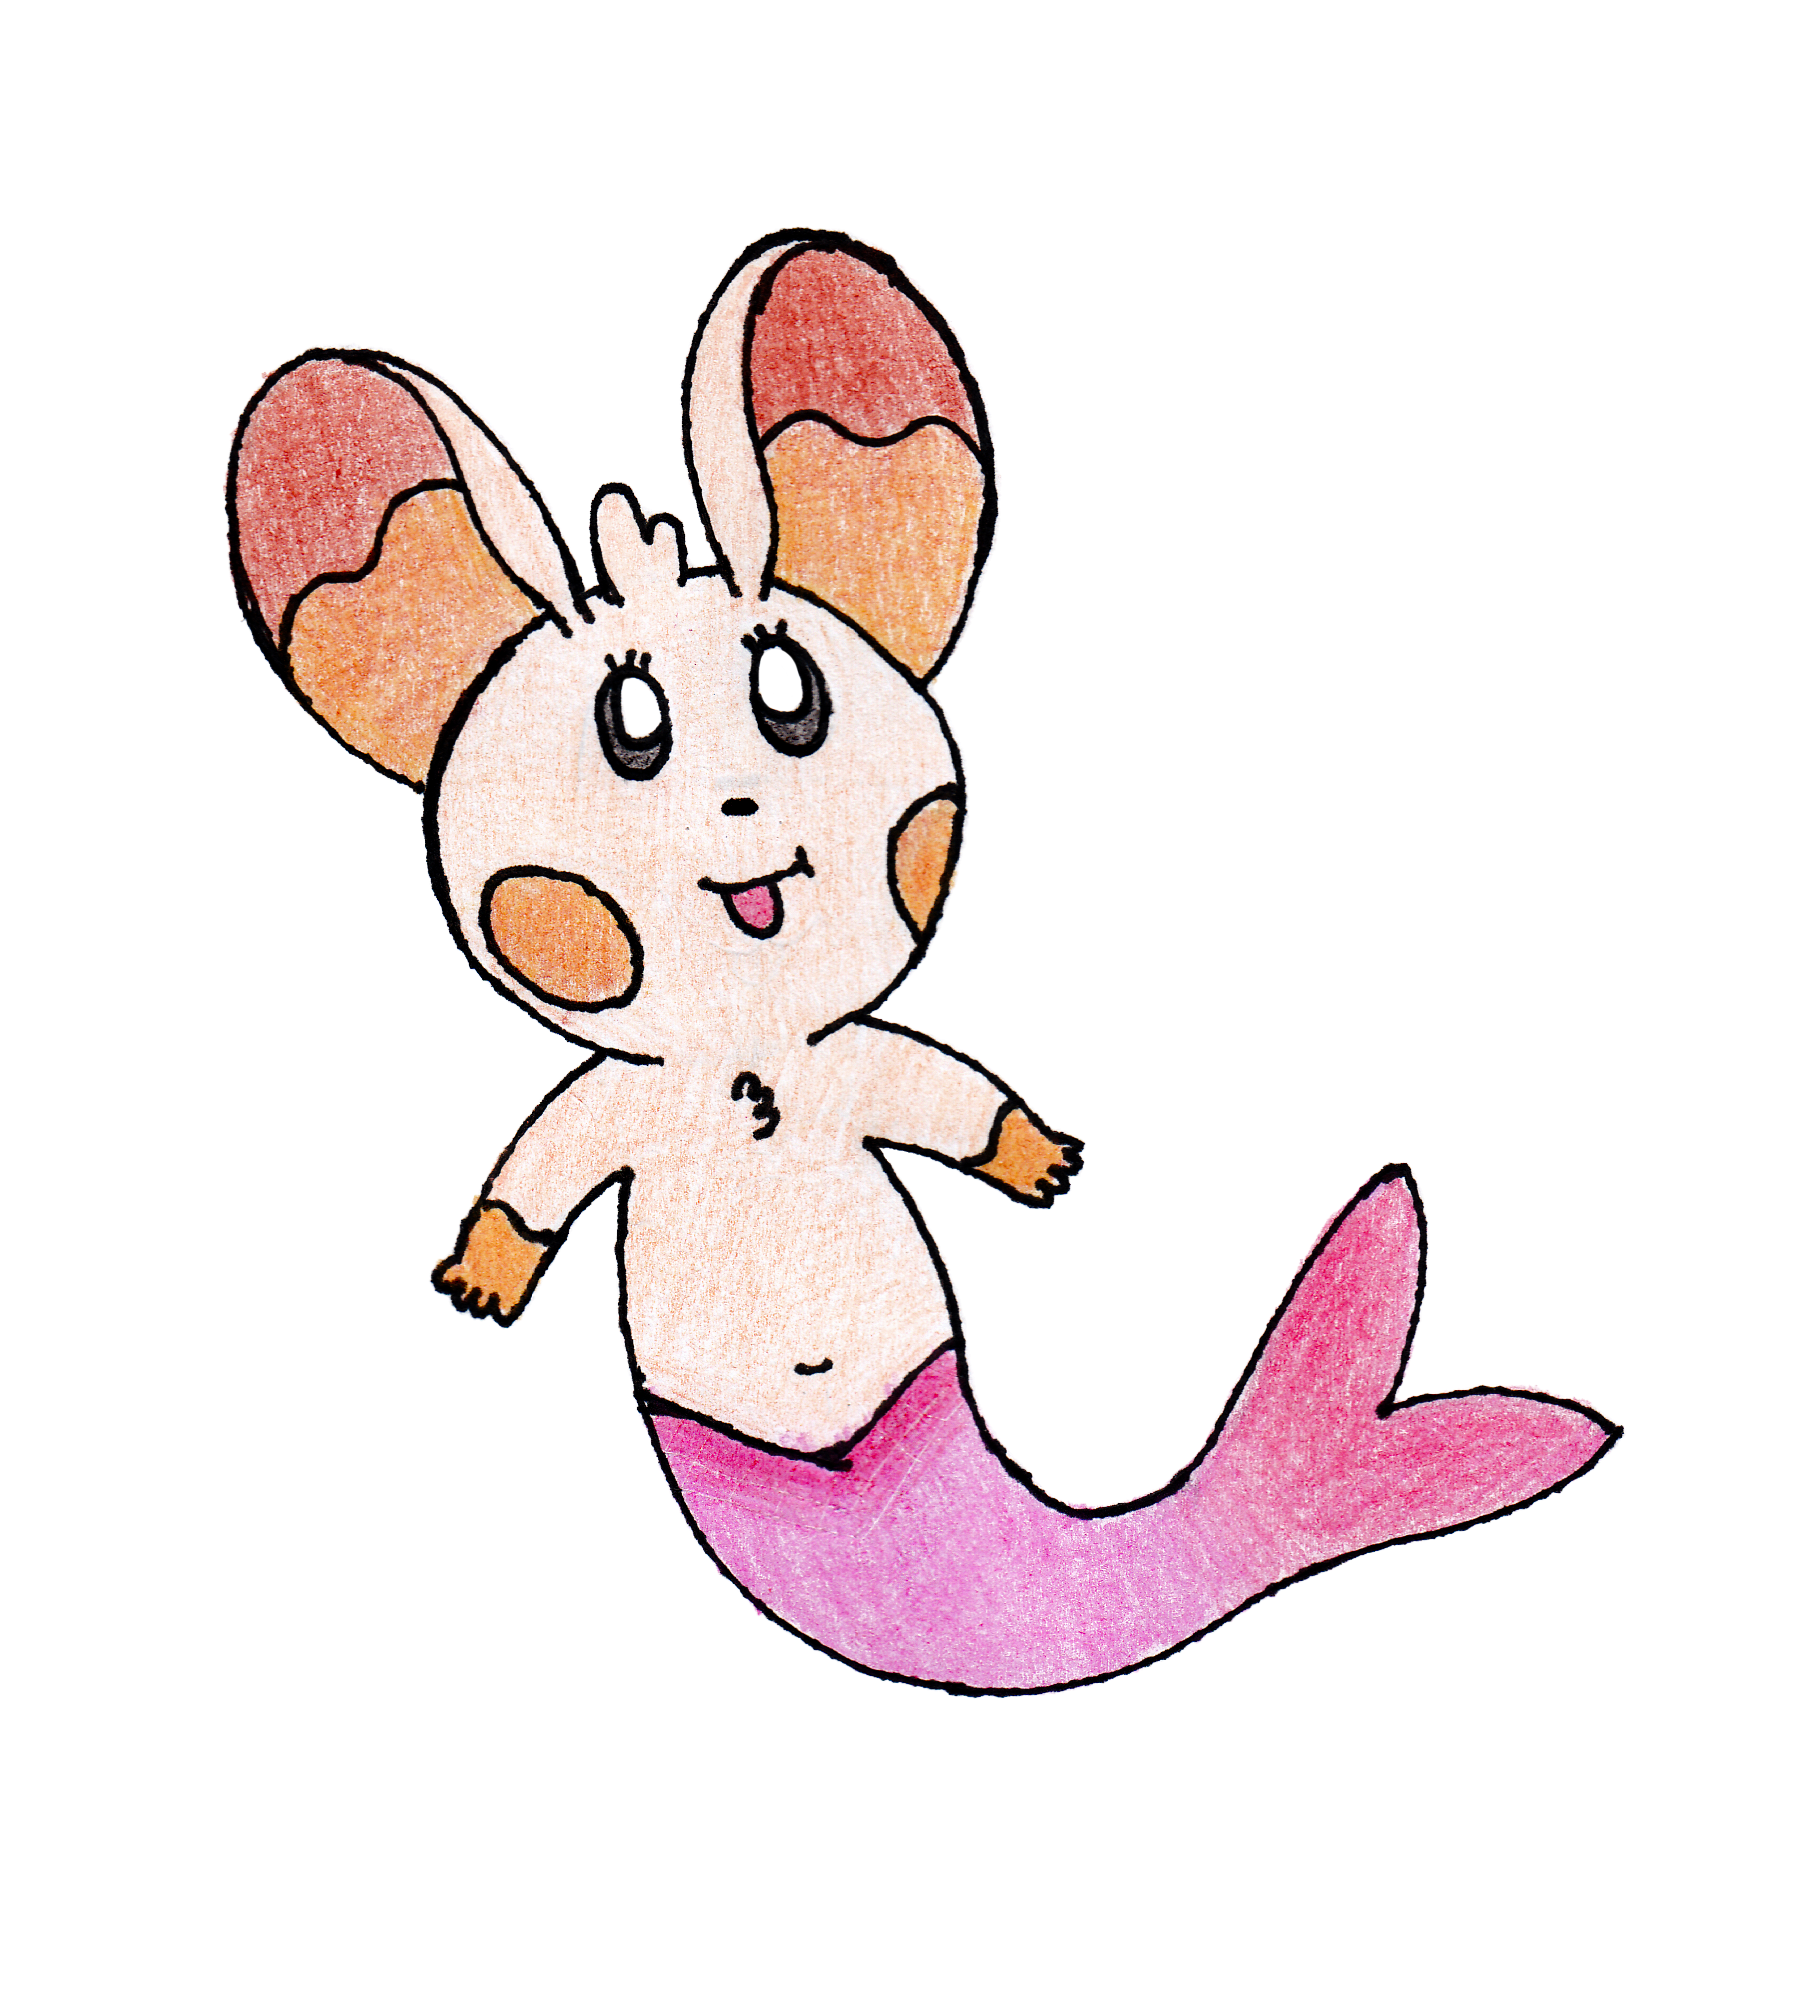 A drawing of Aidan the mouse turned into a Mermaid with a bright pink tail